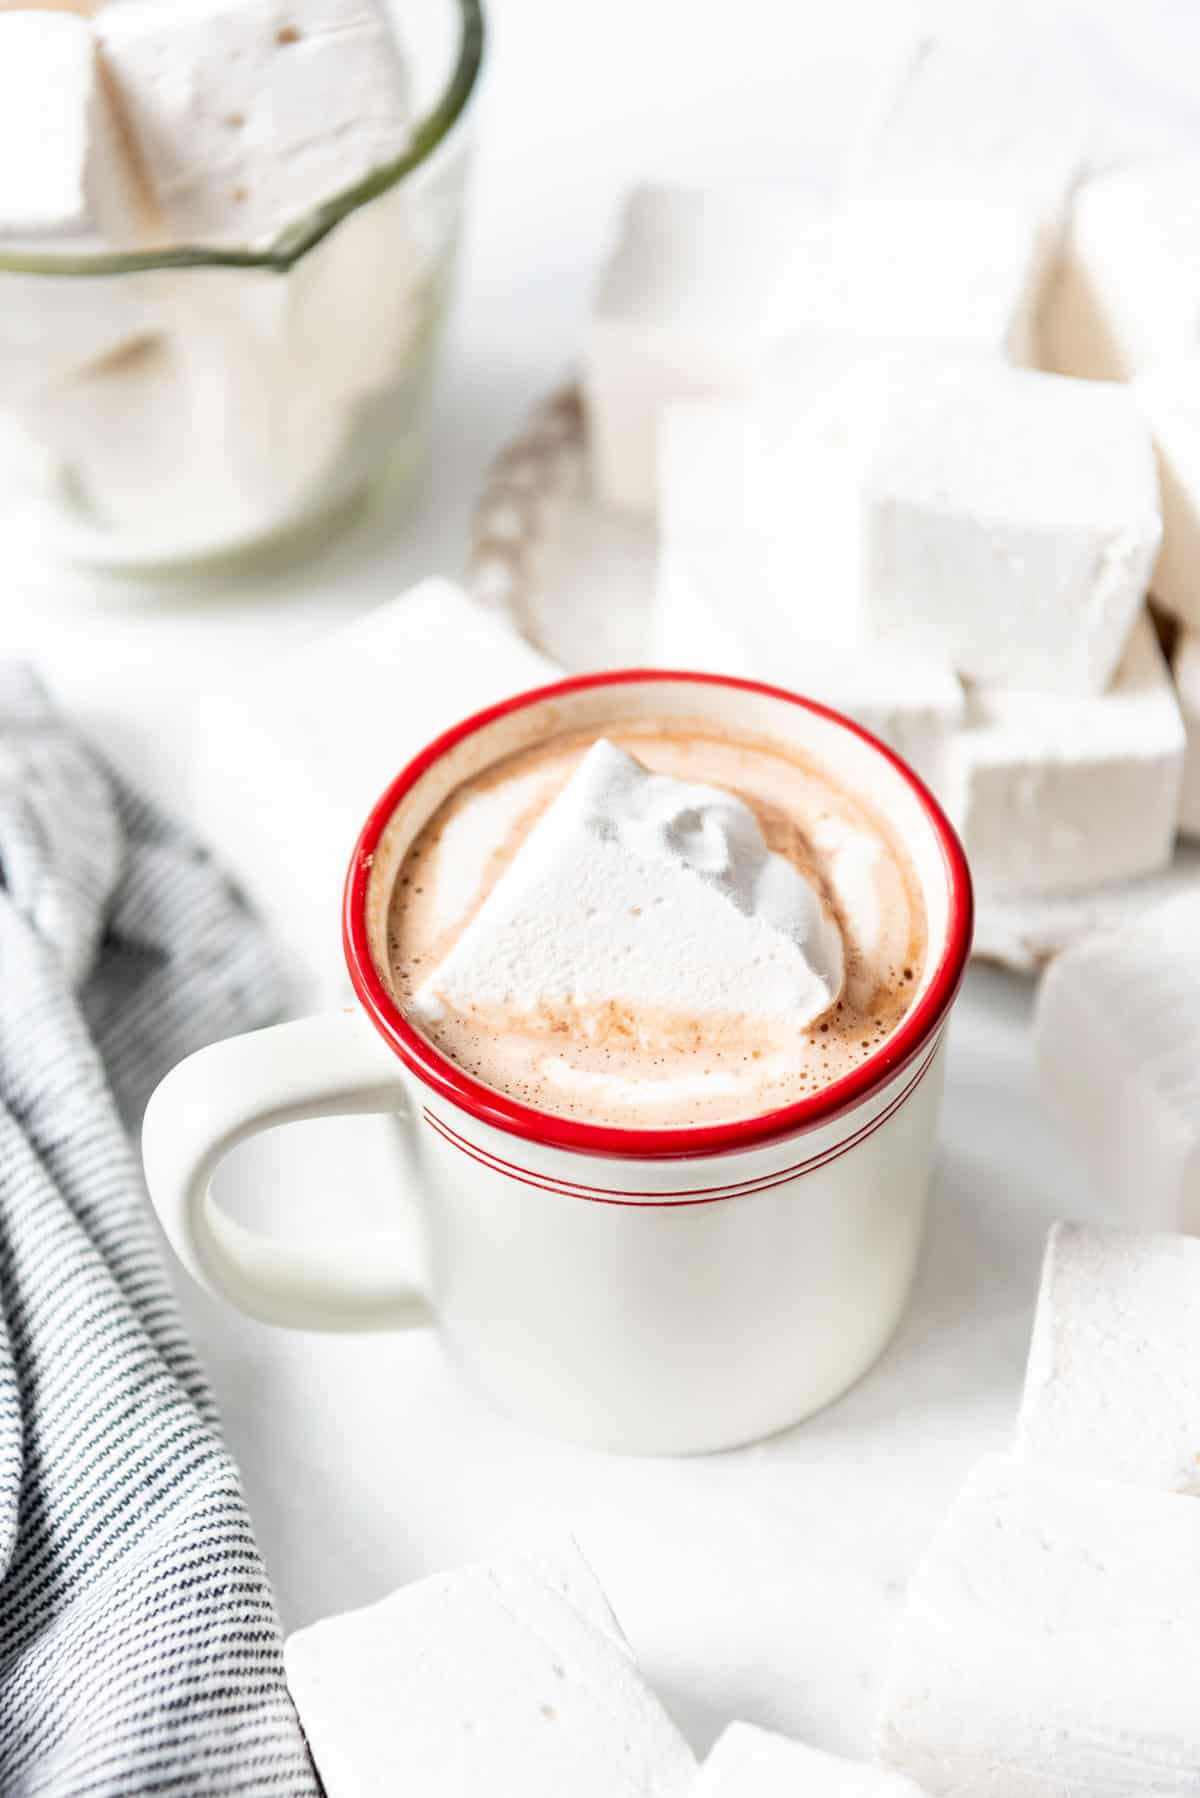 A large homemade marshmallow in a mug of hot chocolate with a red rim surrounded by more large marshmallow cubes.